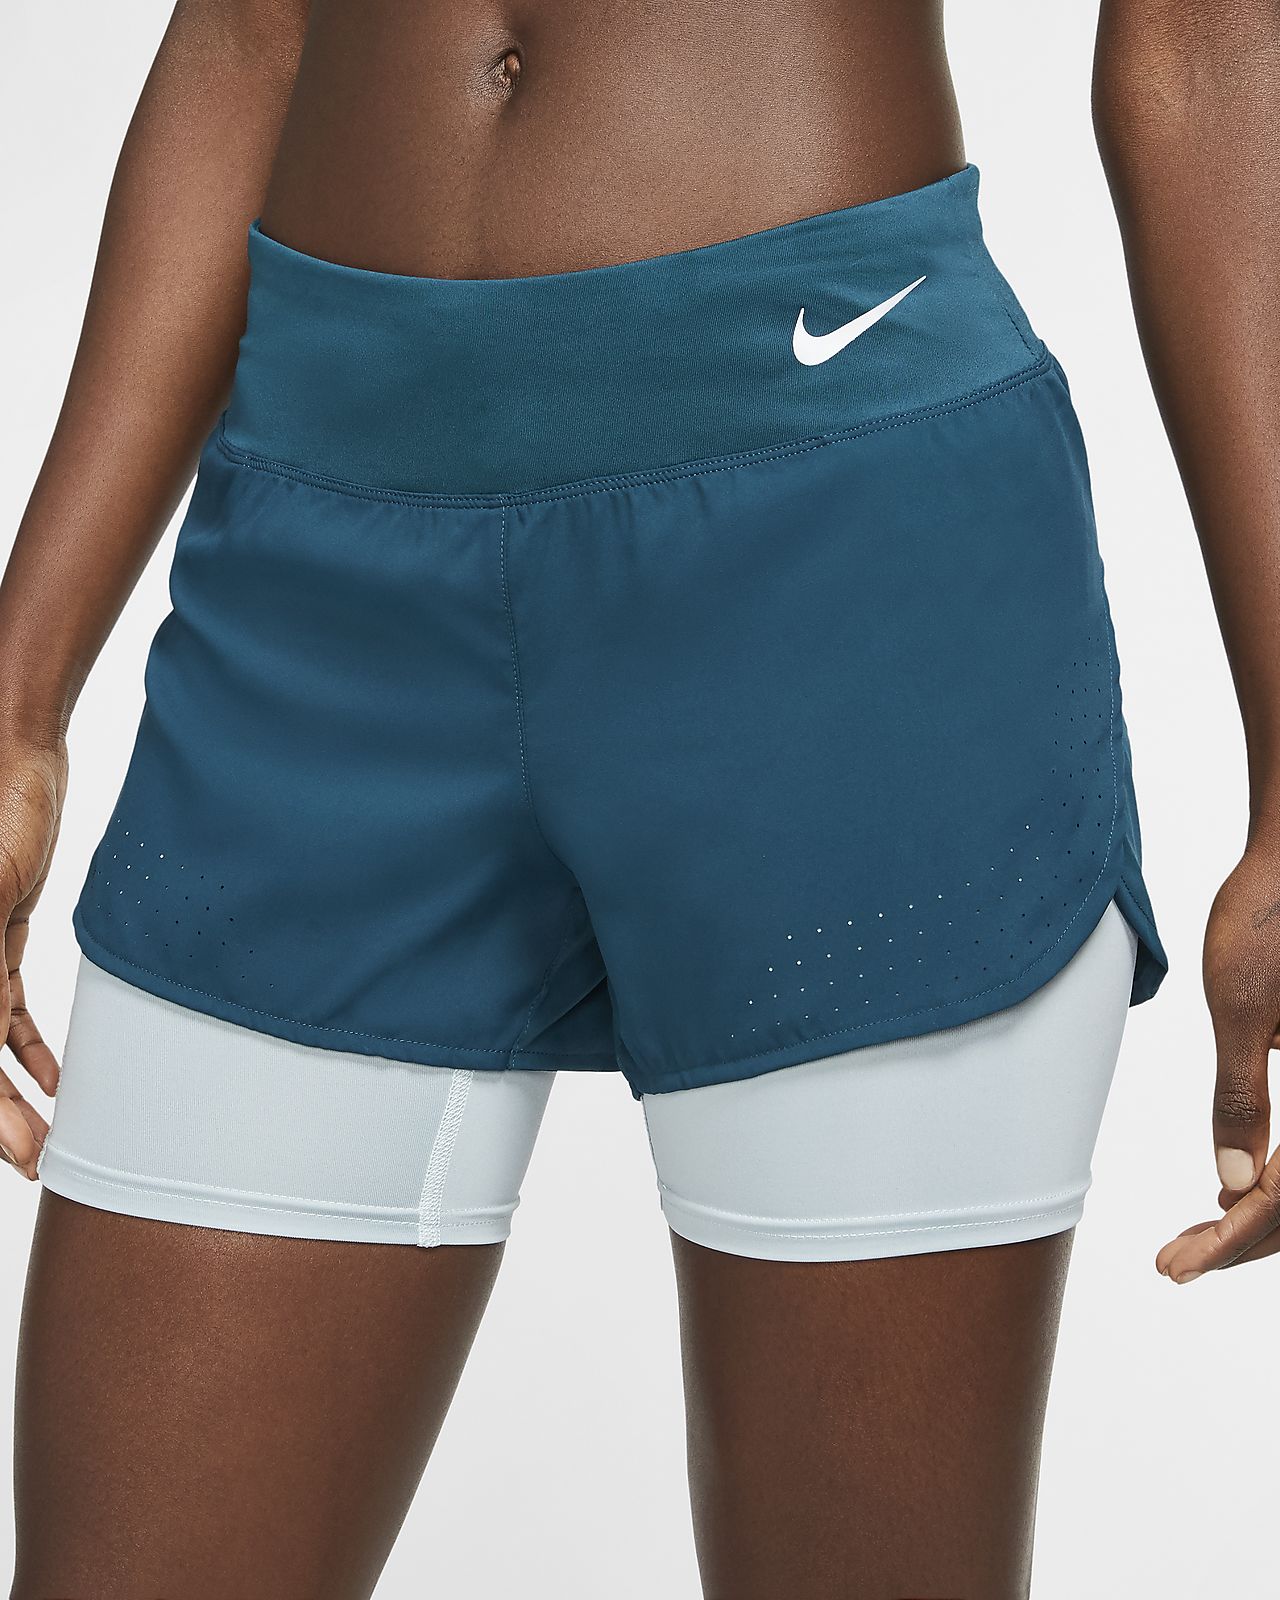 Download Nike Eclipse Women's 2-in-1 Running Shorts. Nike IL